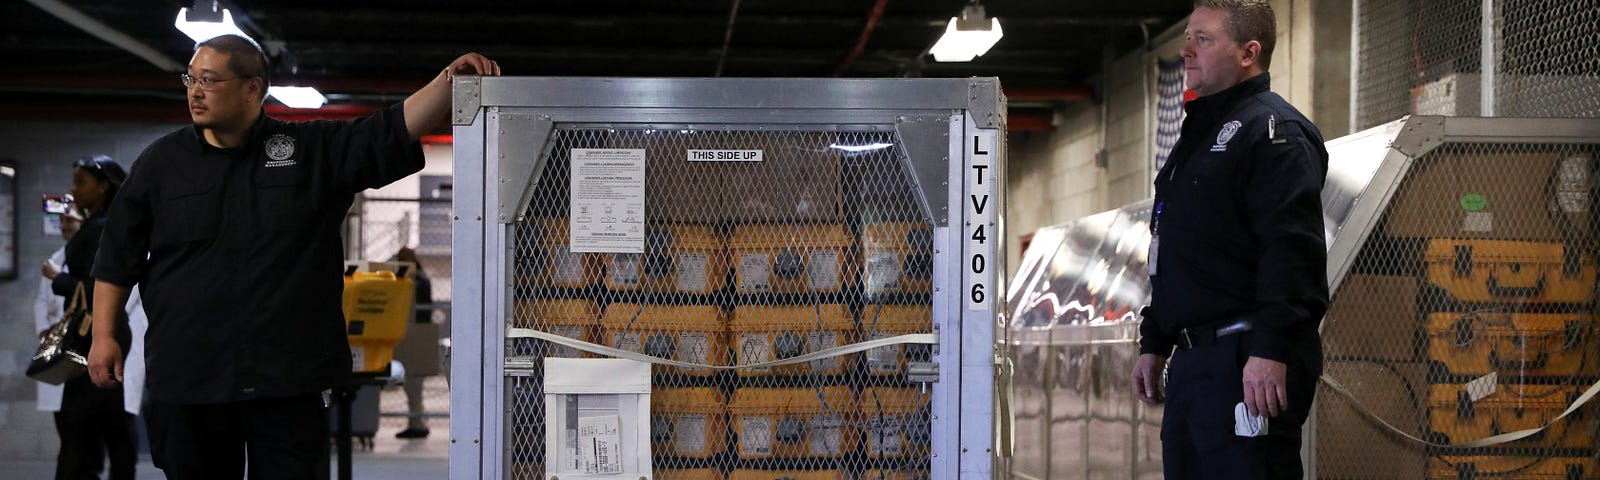 Ventilators at the New York City Emergency Management Warehouse are shipped out for distribution in the Brooklyn borough of New York City, March 24, 2020. Photo by Caitlin Ochs/Reuters